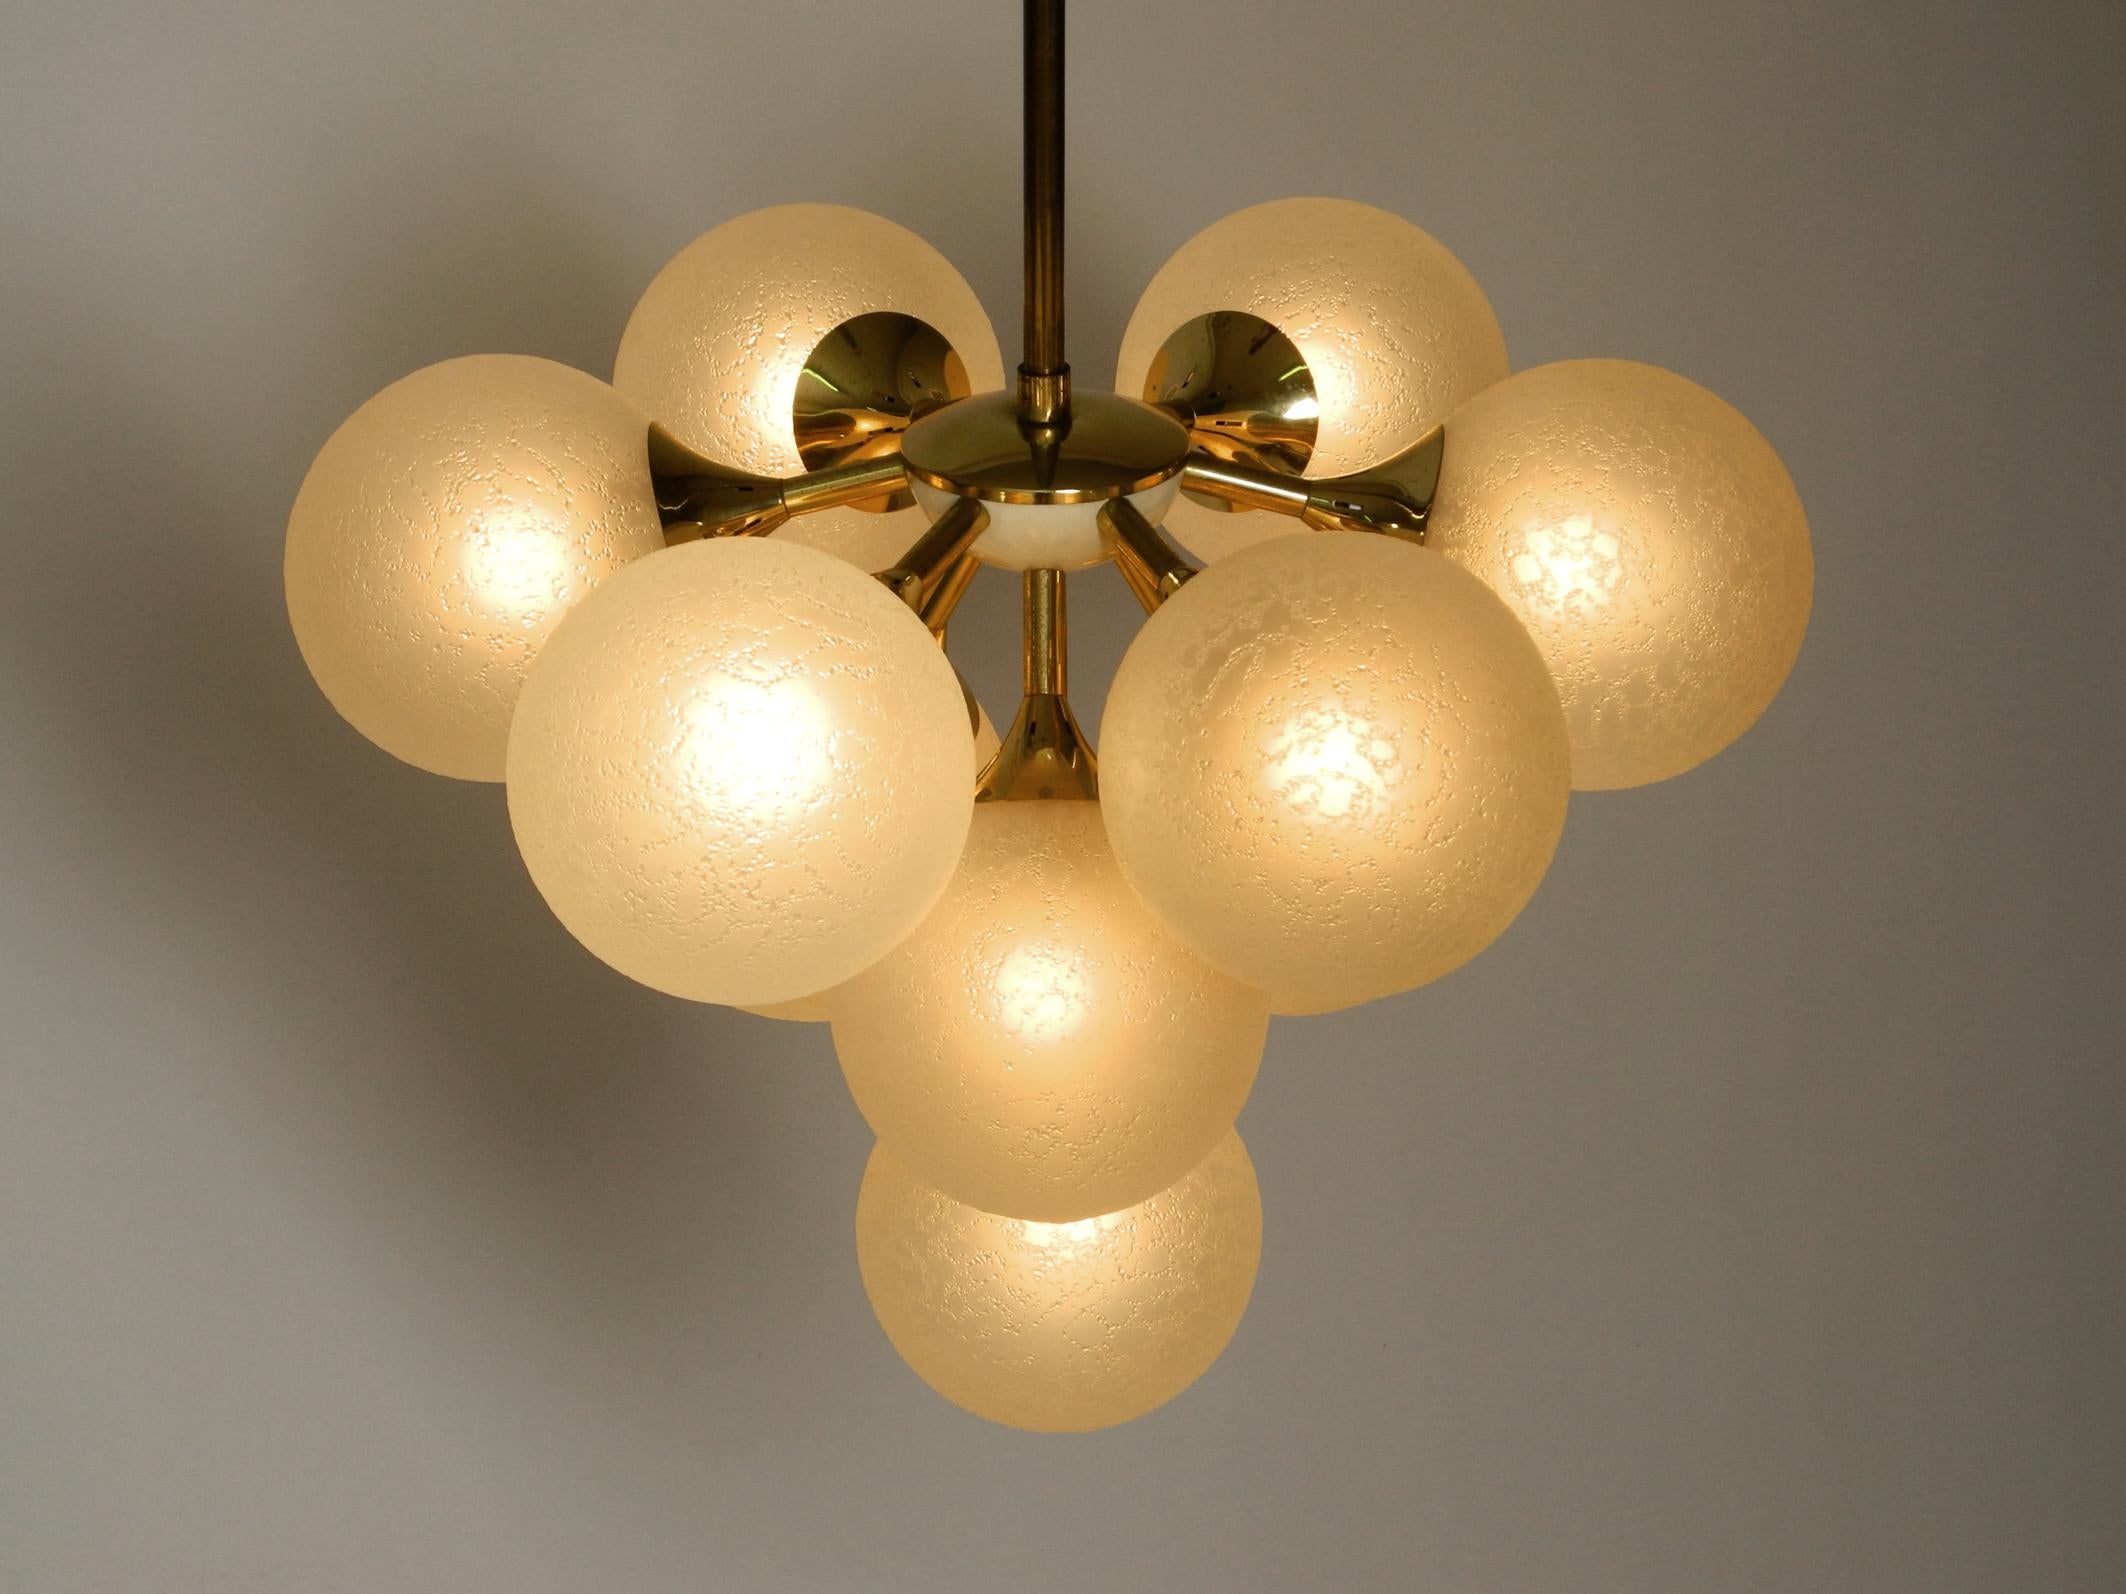 Beautiful rare 1960s Kaiser ceiling lamp with 10 spherical glass shades 13